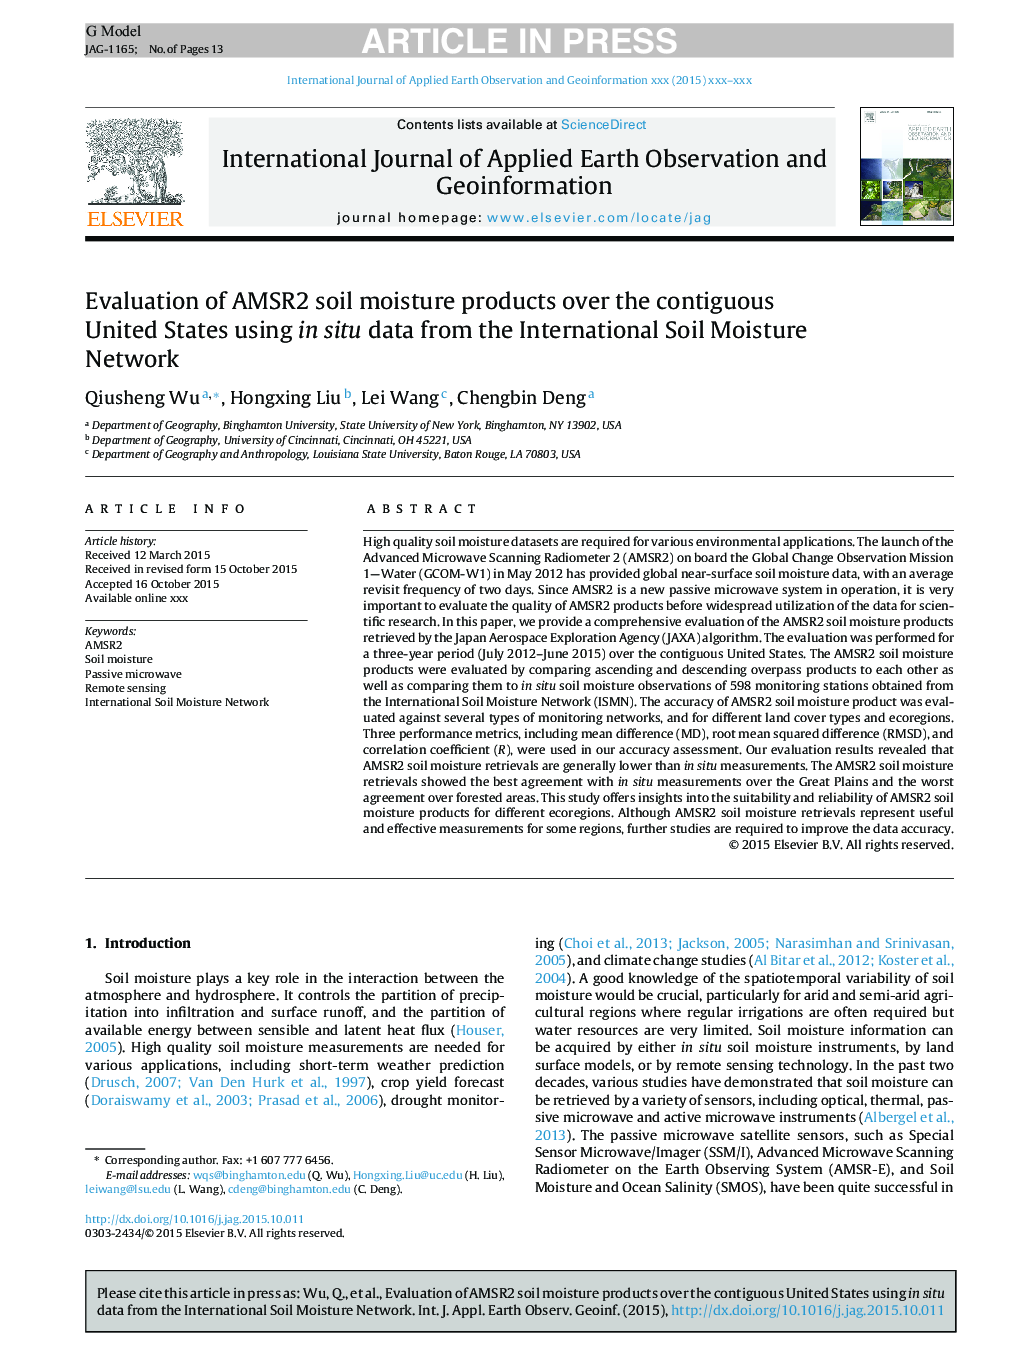 Evaluation of AMSR2 soil moisture products over the contiguous United States using in situ data from the International Soil Moisture Network